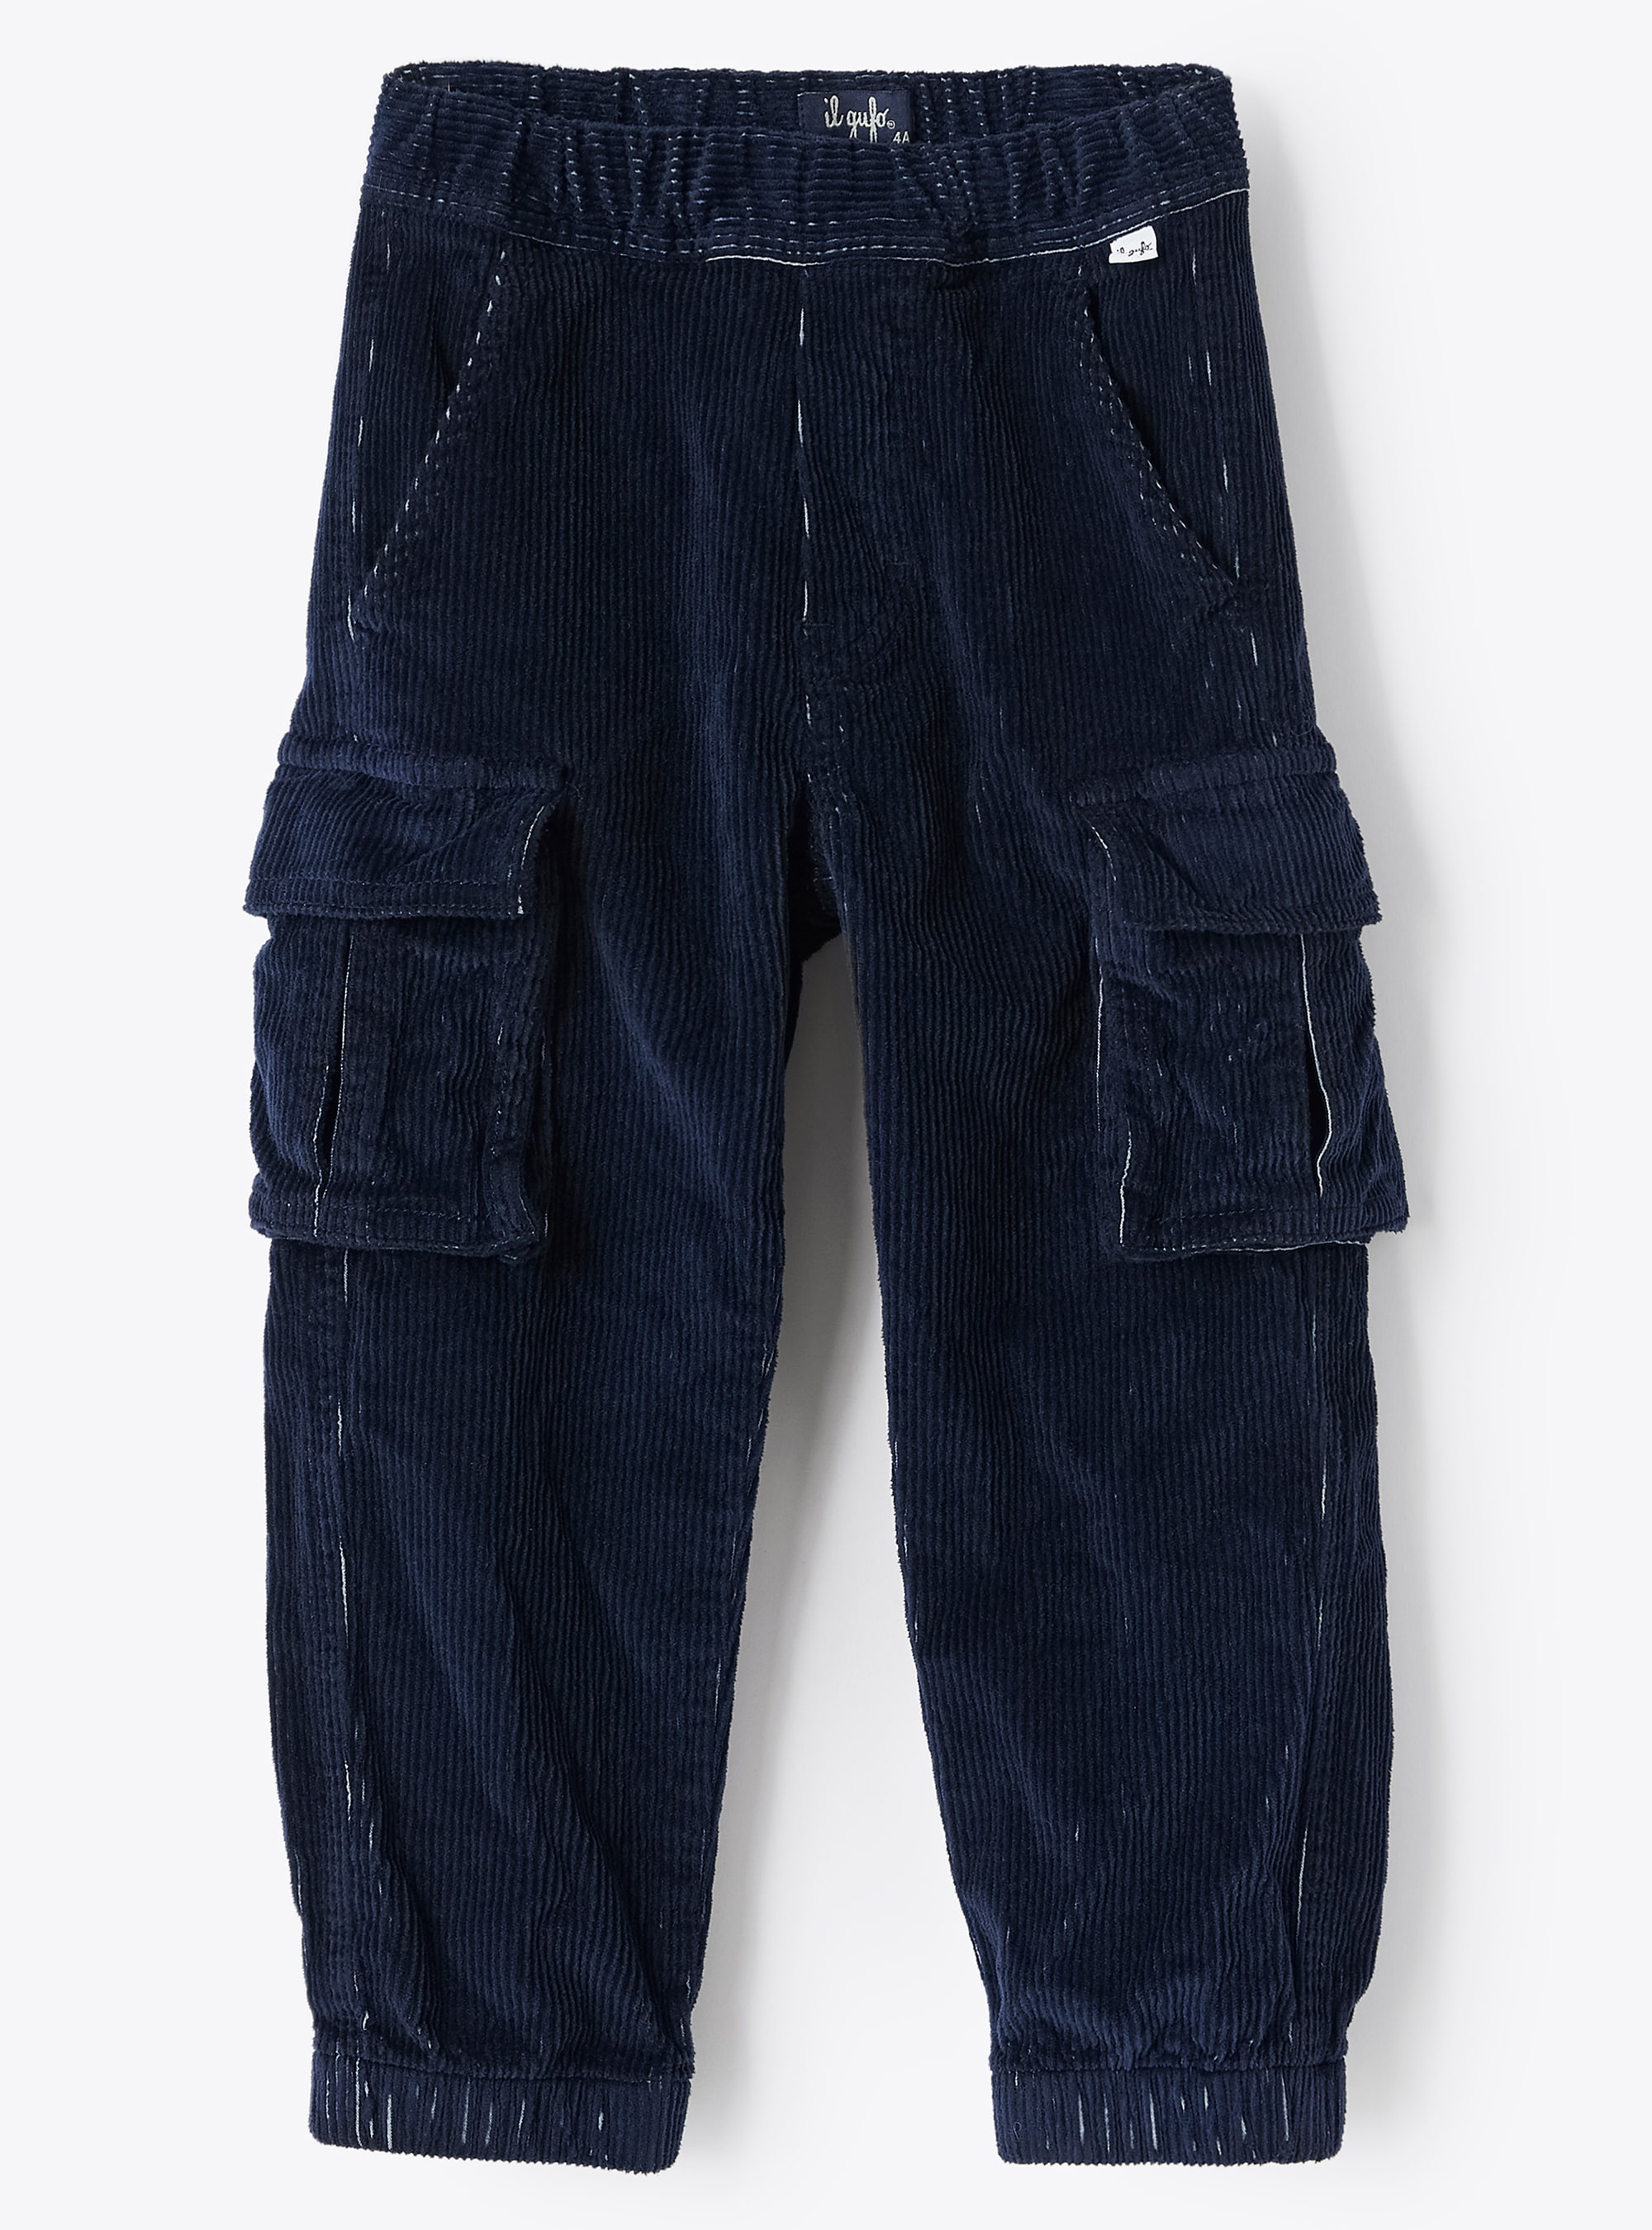 Navy corduroy cargo trousers - Trousers - Il Gufo